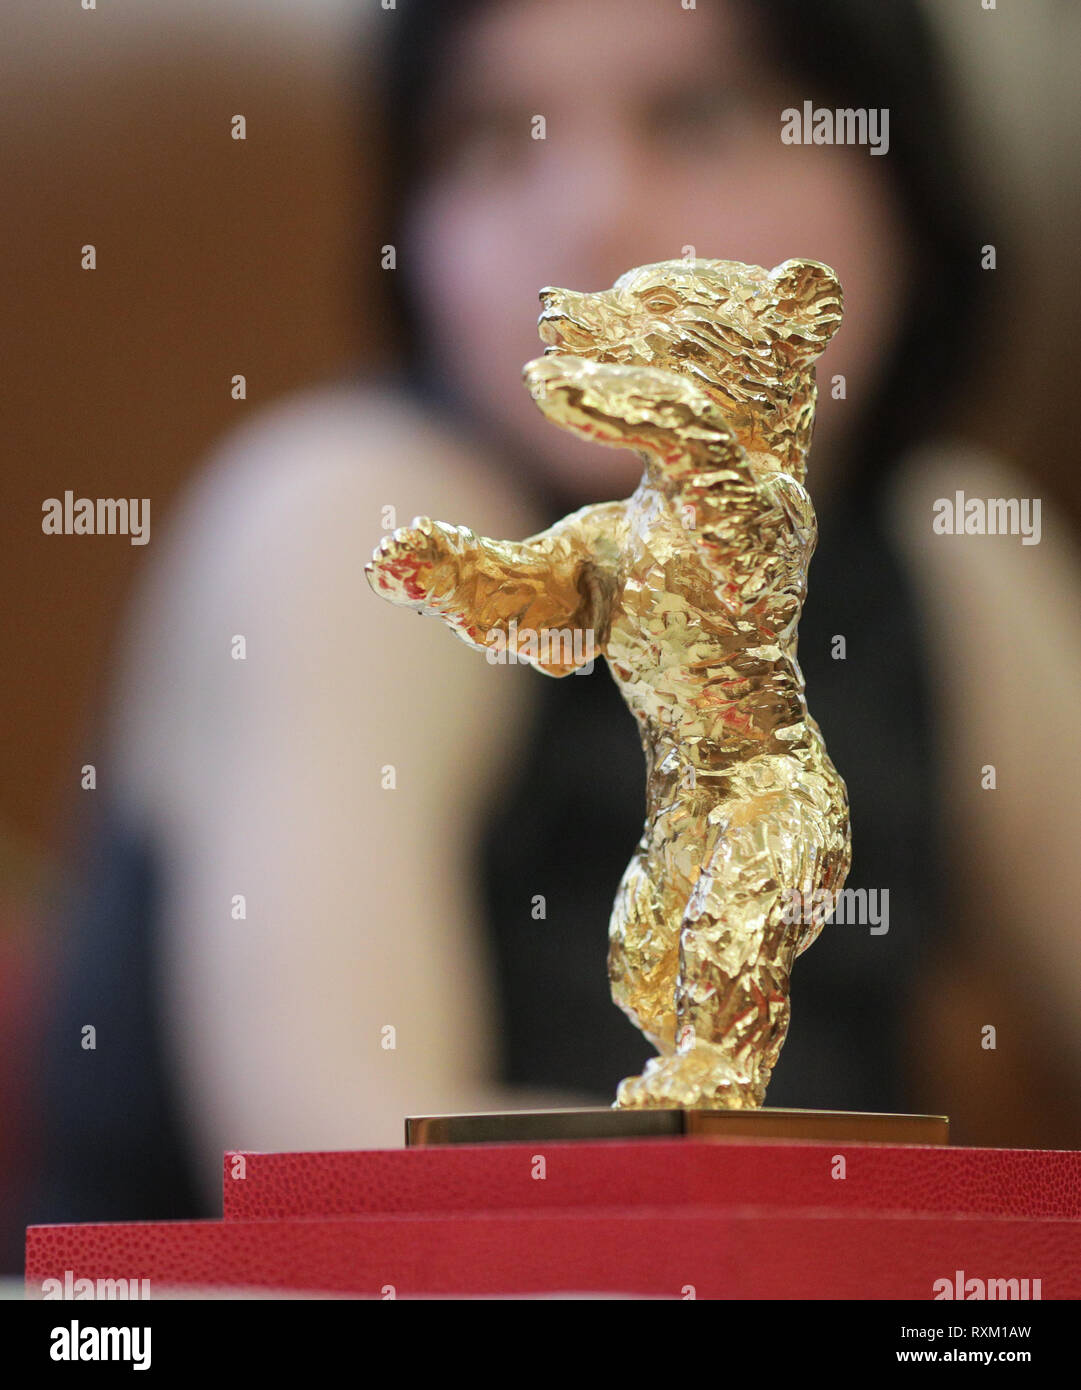 Bucharest, Romania - March 8, 2019: The Golden Bear, the highest prize awarded for the best film at the Berlin International Film Festival, is present Stock Photo